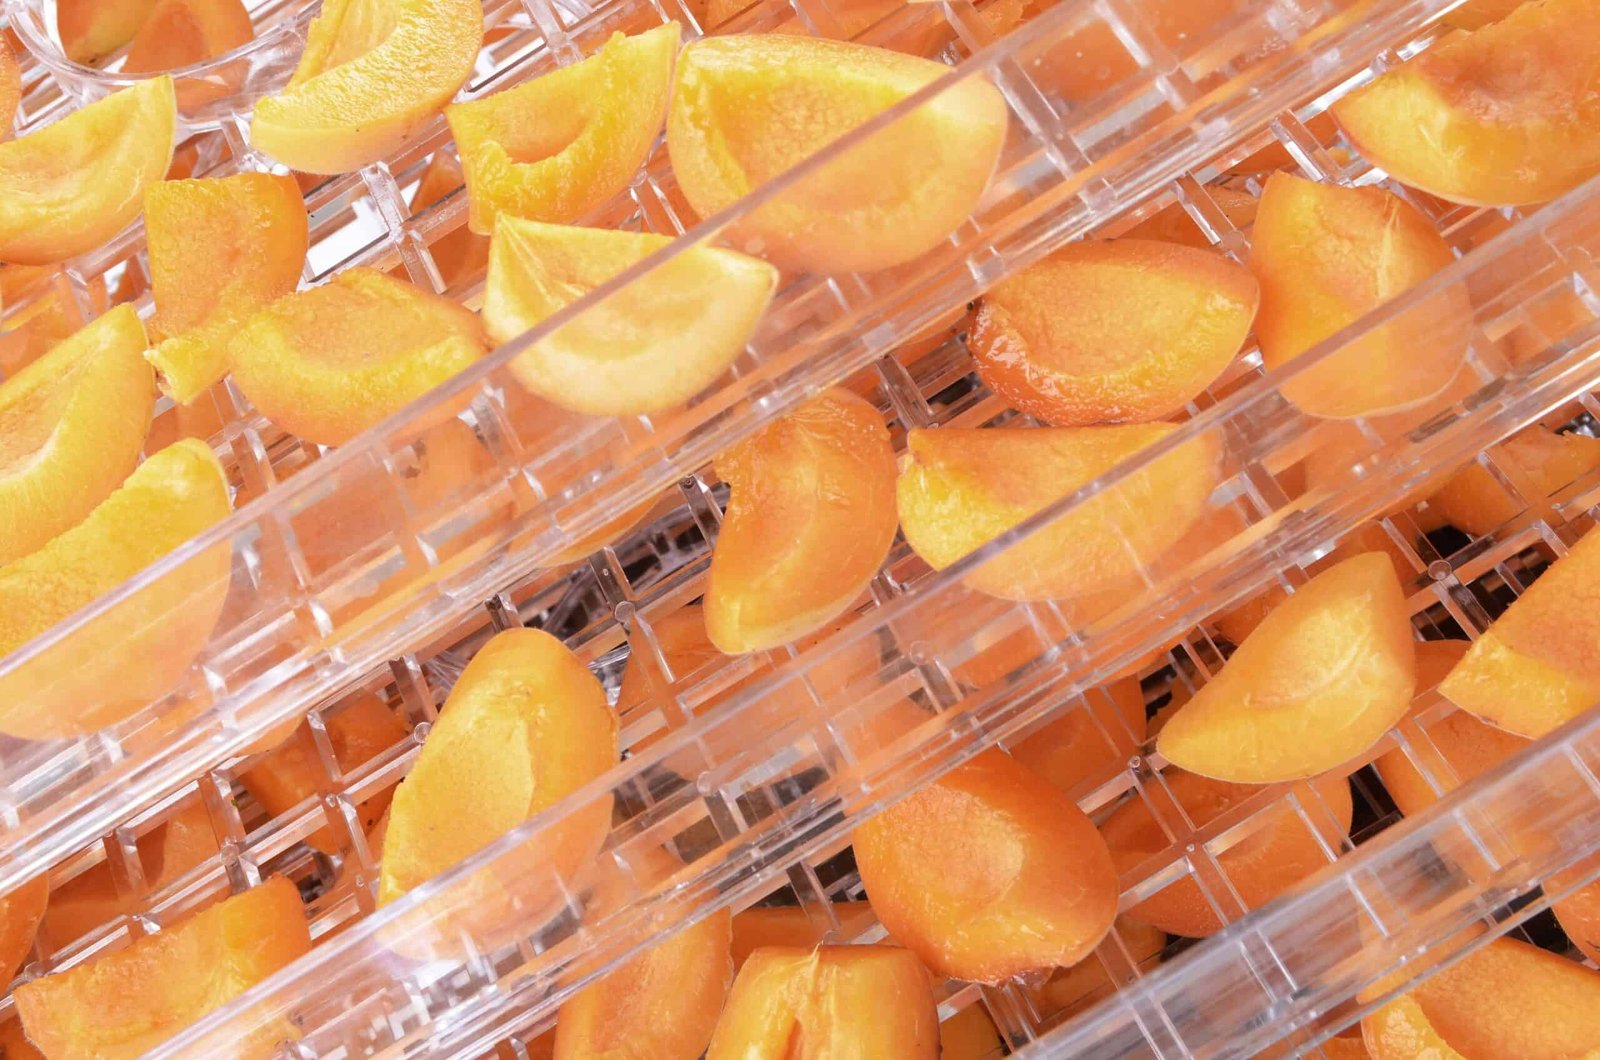 sliced peaches on plastic trays ready to be dehydrated